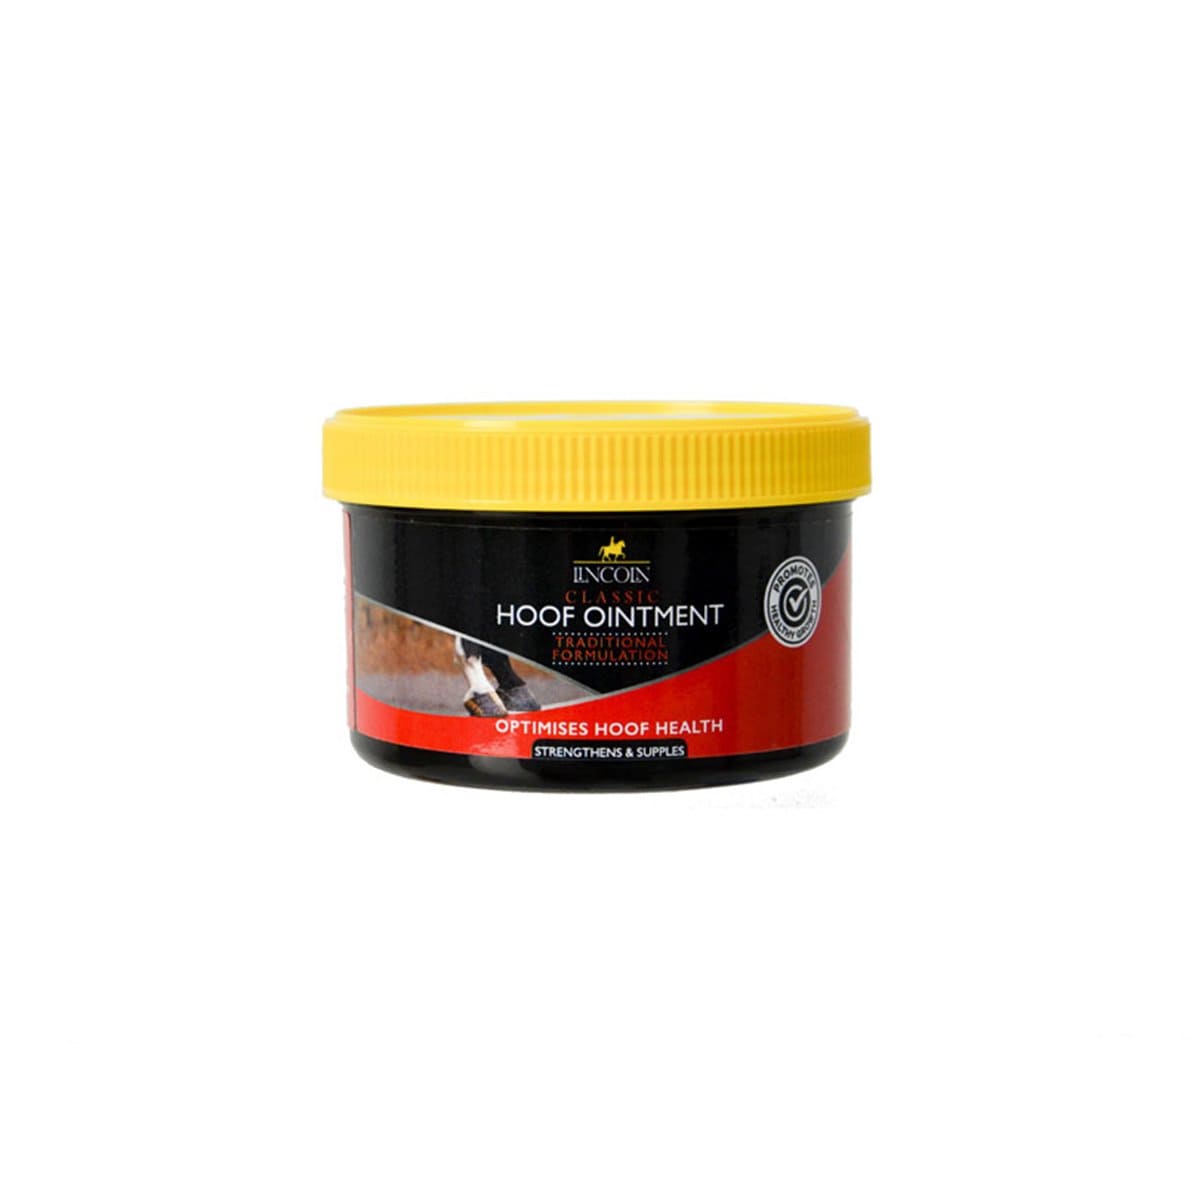 Lincoln Classic Hoof Ointment - 500g